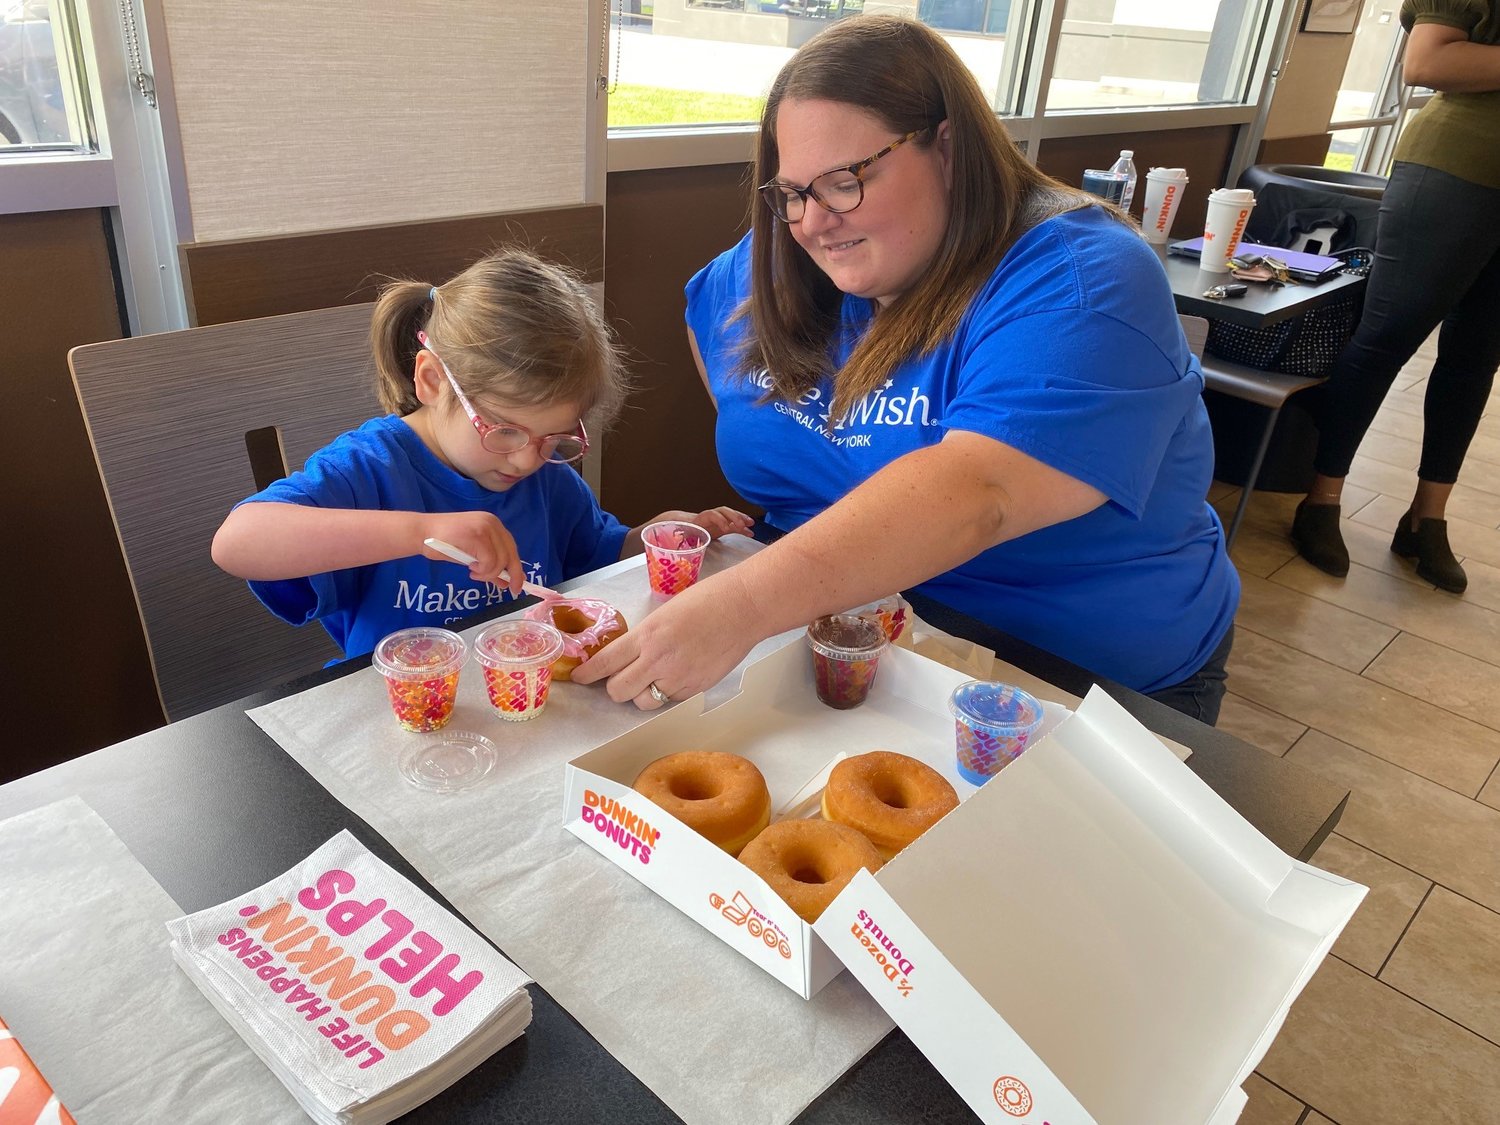 Mohawk Valley Wish Kid Raelyn Gordon, left, celebrates the 10th anniversary of the Make-A-Wish Star Donut campaign with her mom, Heather Gordon, by frosting her own donuts on Thursday at the Dunkin’ restaurant at 112 N. Genesee St. in Utica. Guests who donate $1 to Make-A-Wish at participating Dunkin’ restaurants in the Mohawk Valley through September 12 will receive a specially-crafted Make-A-Wish Star Donut.